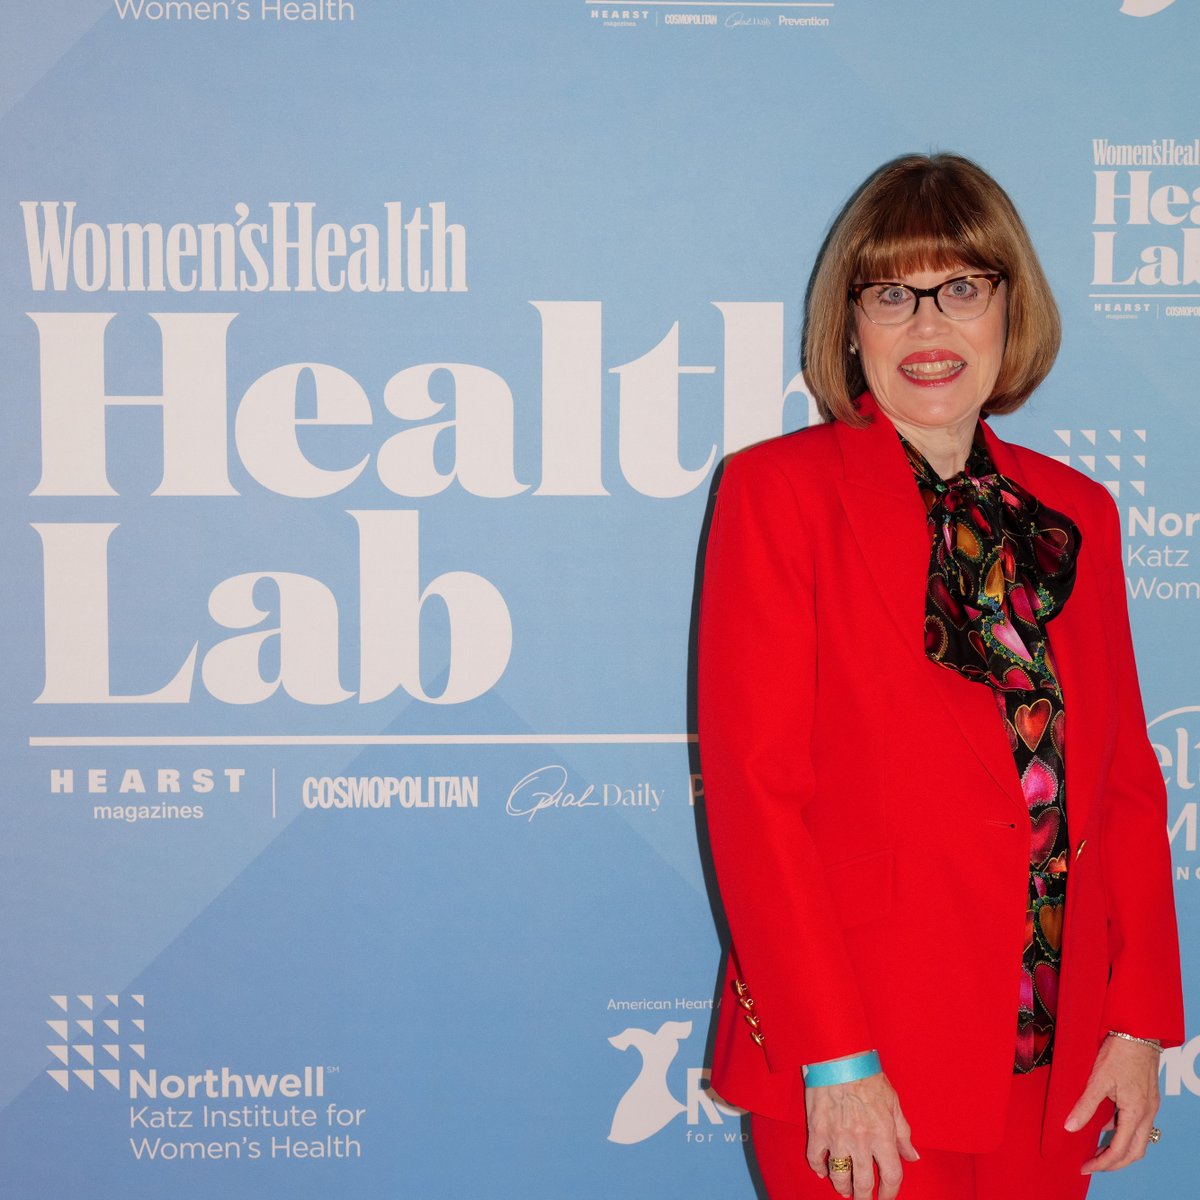 For #WomensHealthWeek @American_Heart joined @WomensHealthMag and @HearstMagazines for the #HearstHealthLab where I led a discussion on women's cardiovascular health with #DrJillKalman @drtaranarula and @SvatiShah. Thanks all for your sharing your inspiring insights. #GettyImages